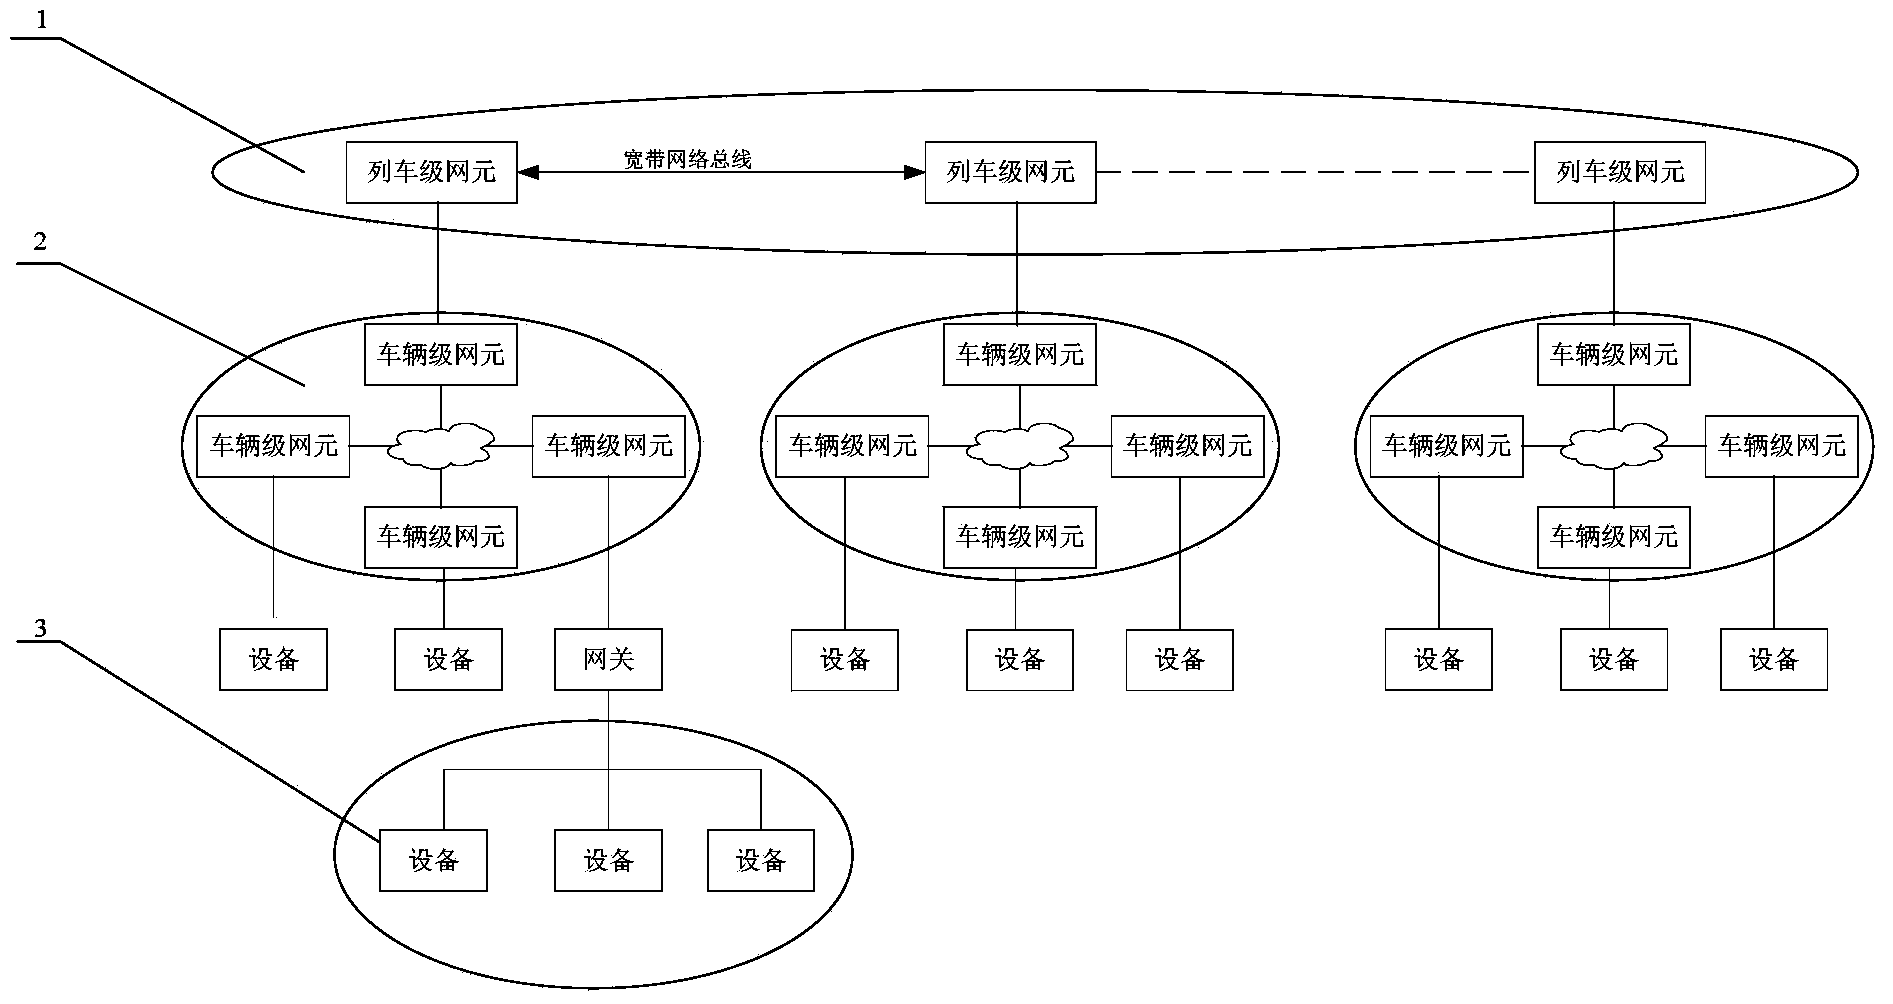 Train broadband communication network architecture suitable for railway vehicle